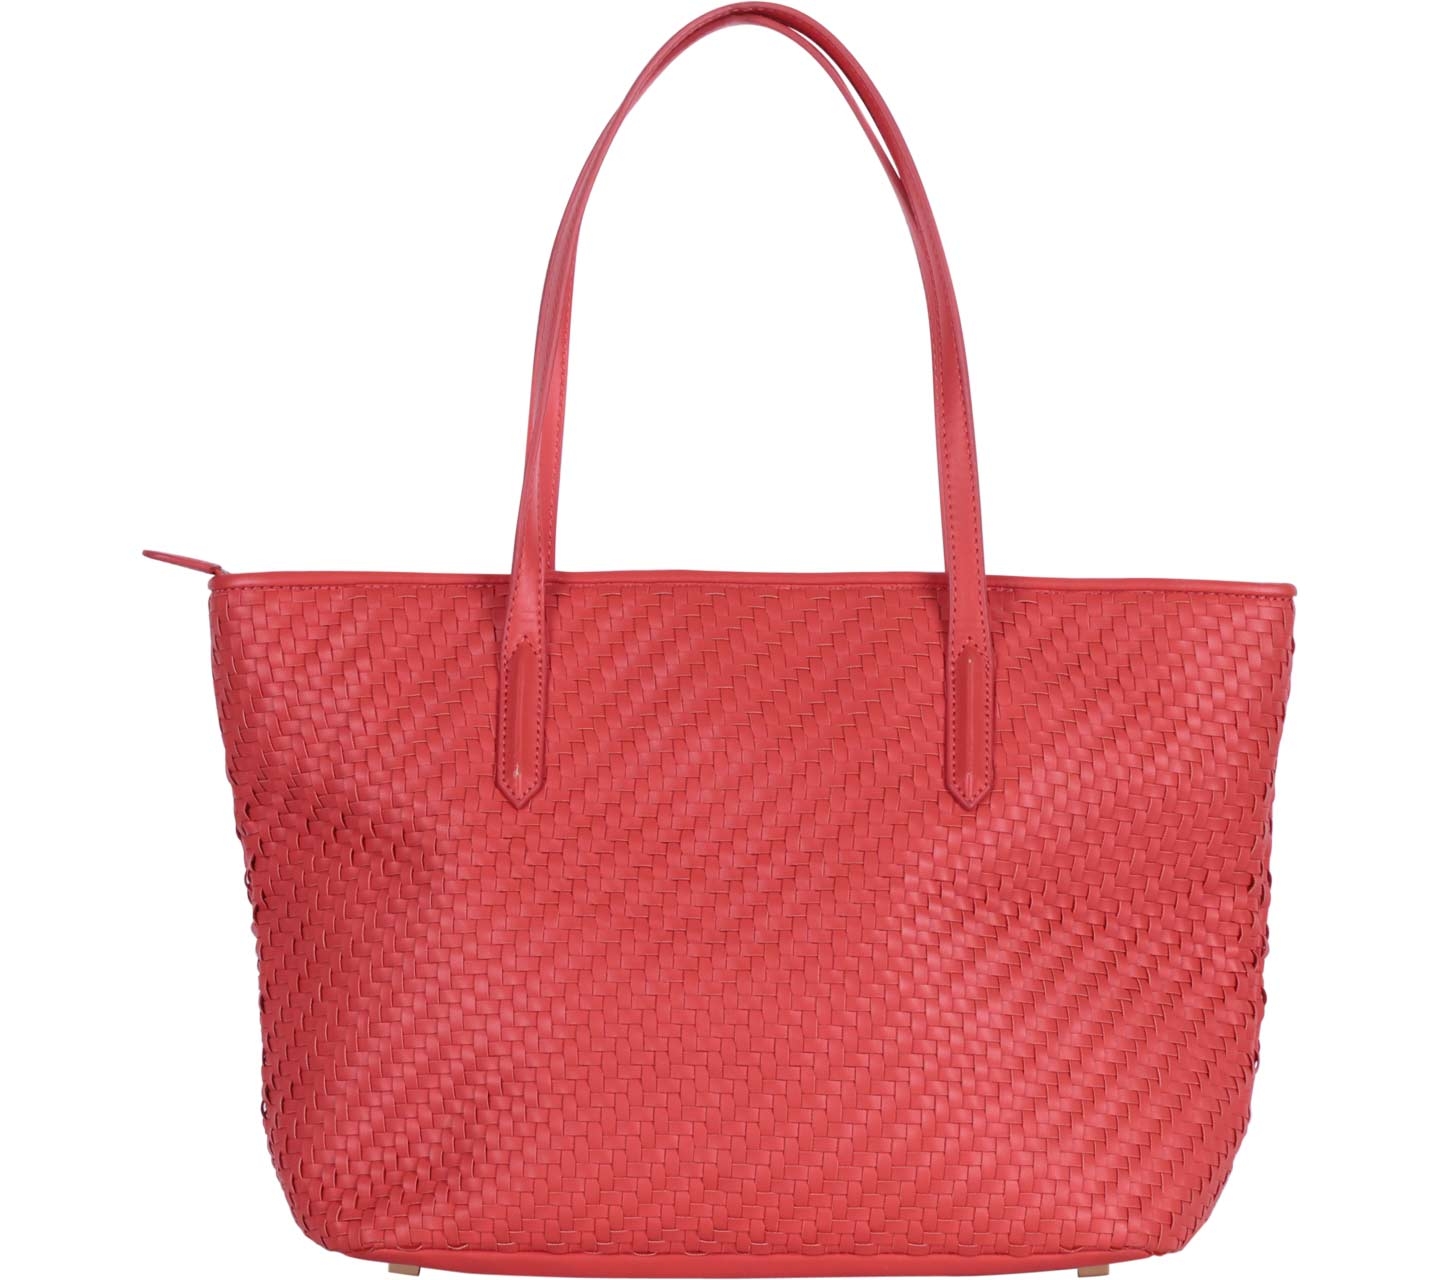 Charles and Keith Peach Tote Bag